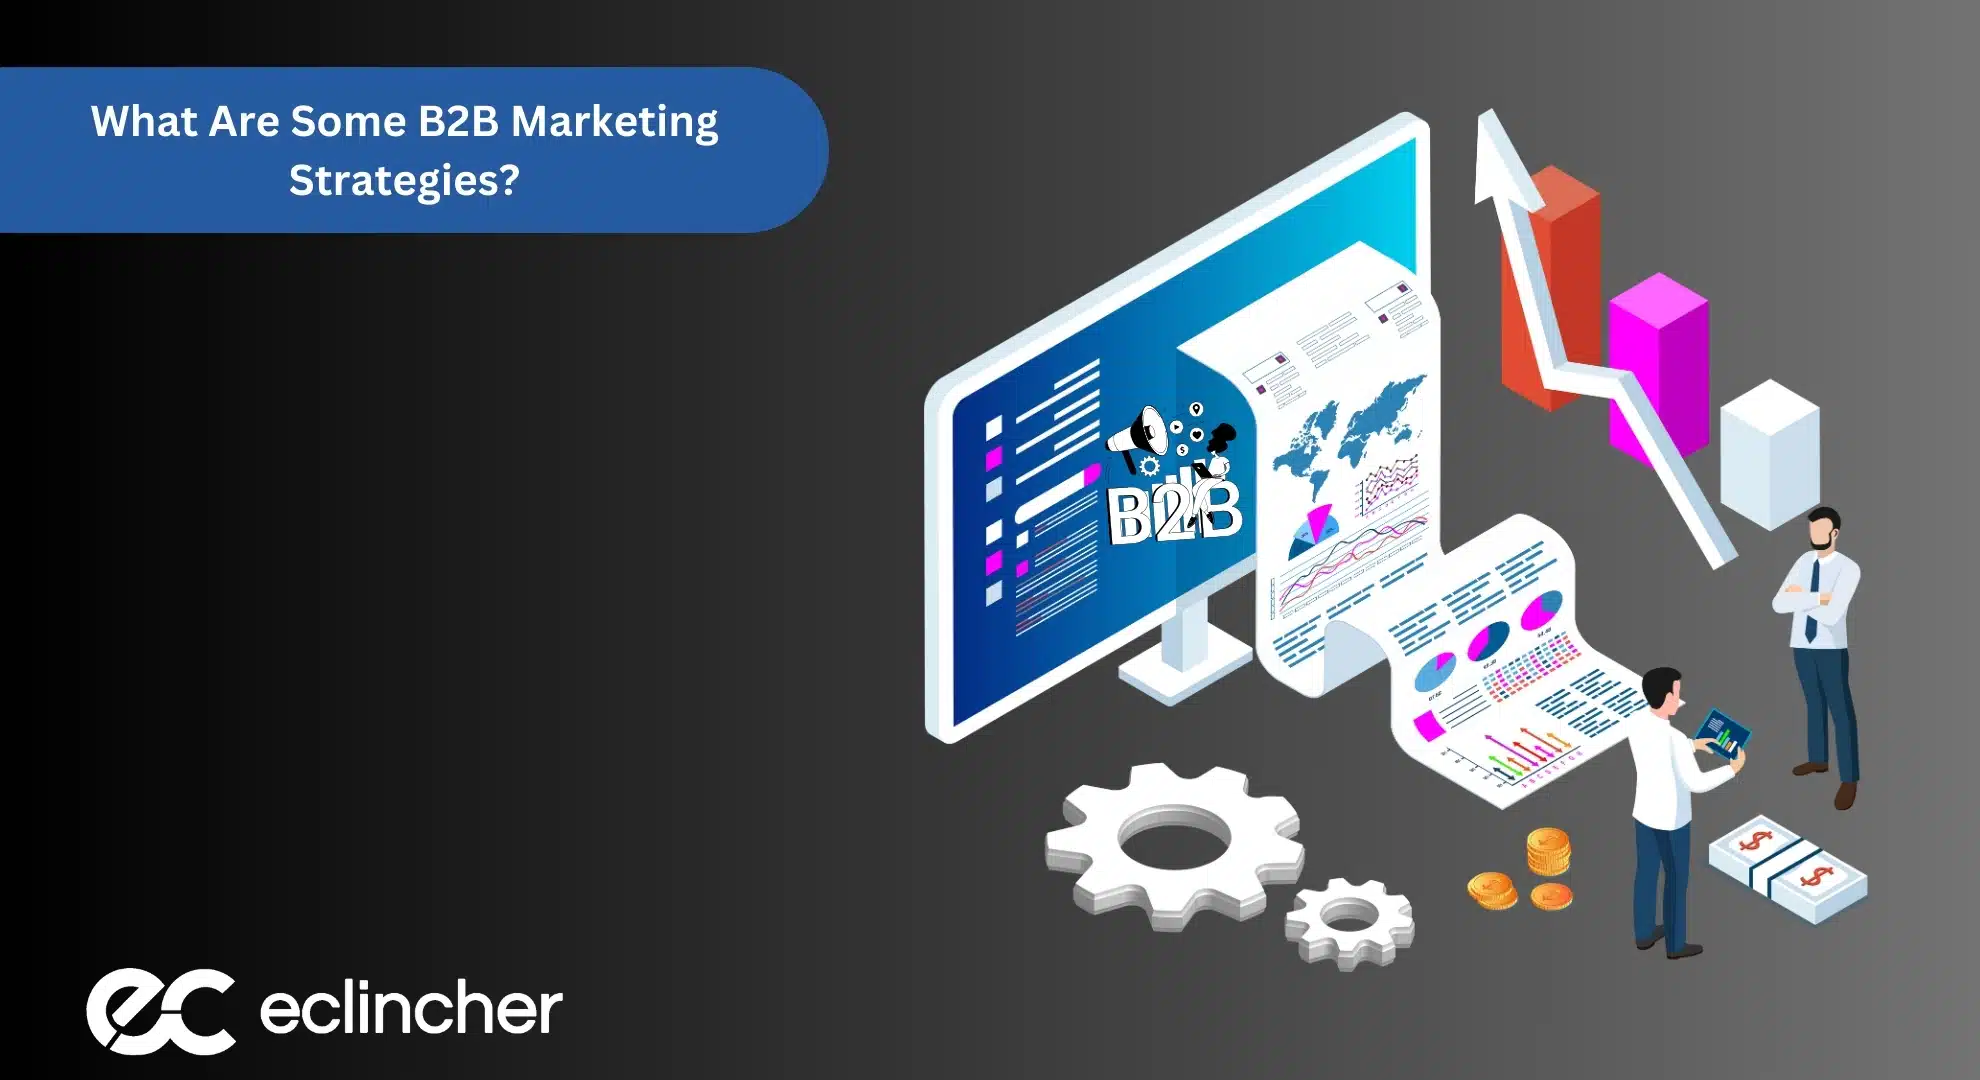 What Are Some B2B Marketing Strategies